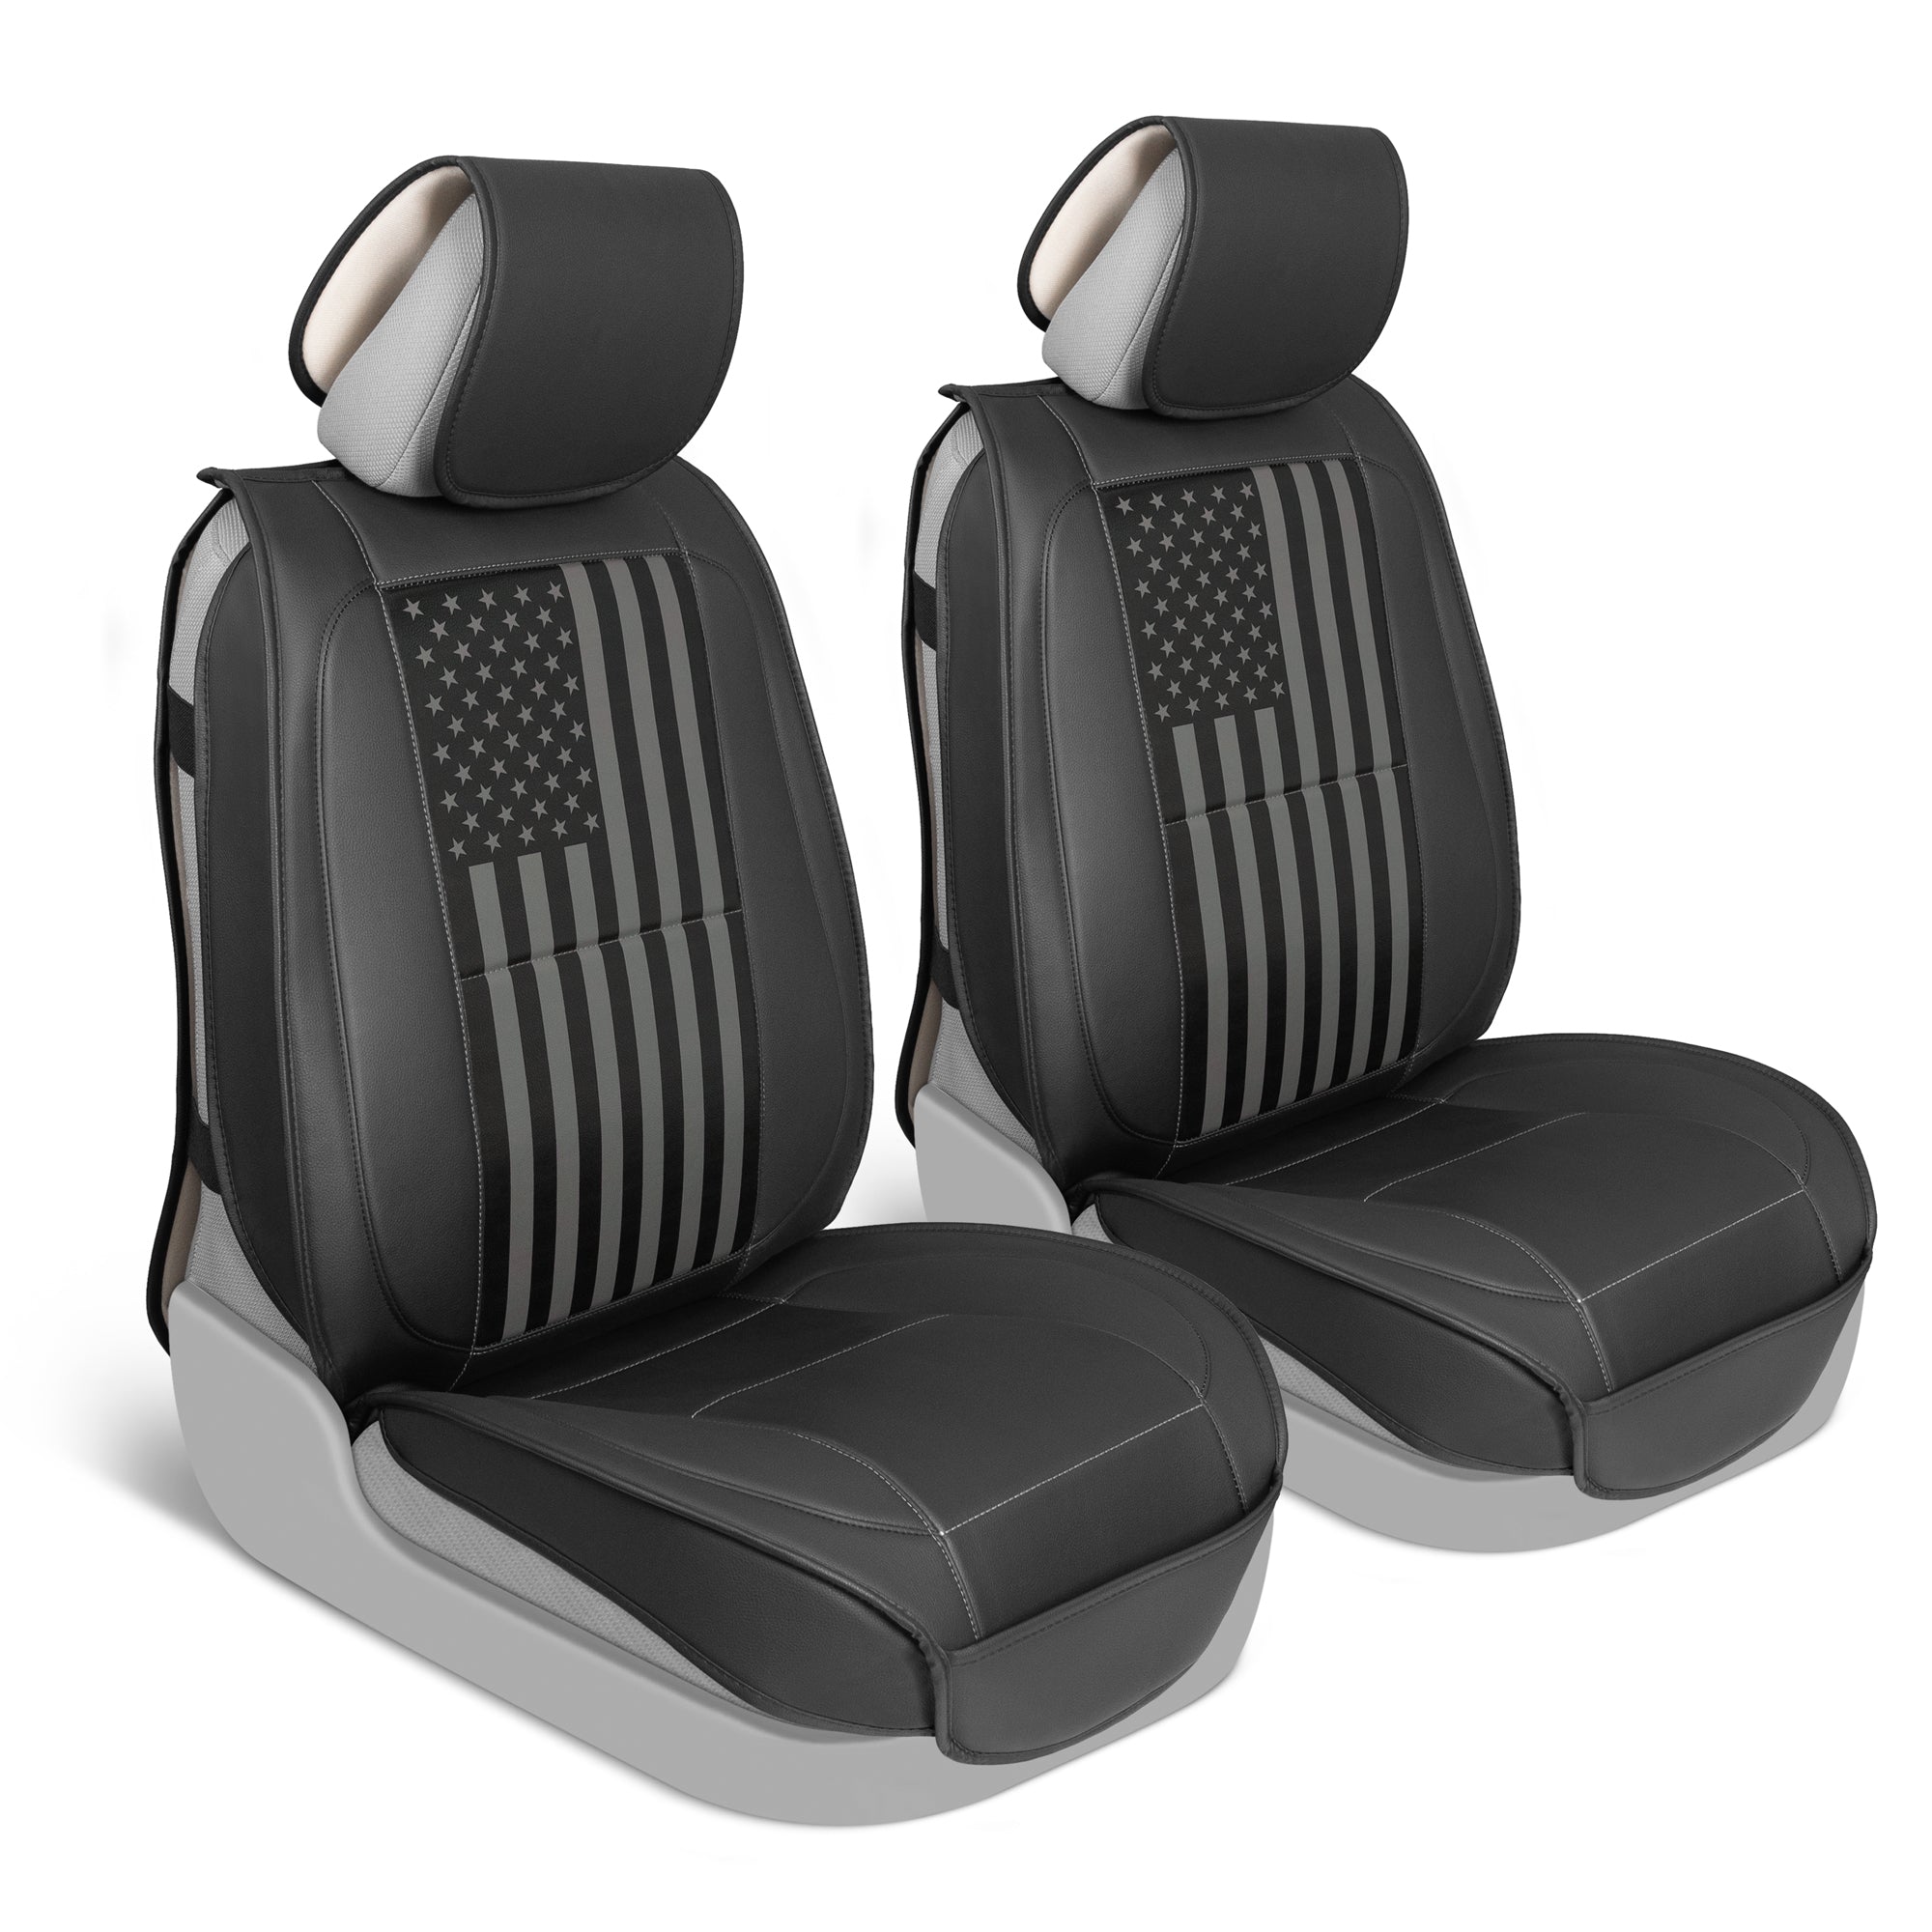 MotorBox Patriot Edition Faux Leather Black & Dark Gray Seat Covers for Car –Black/White US Flag on Cushioned Seat Protectors for Automotive Accessories, Trucks, SUV, Car – Two Front Covers